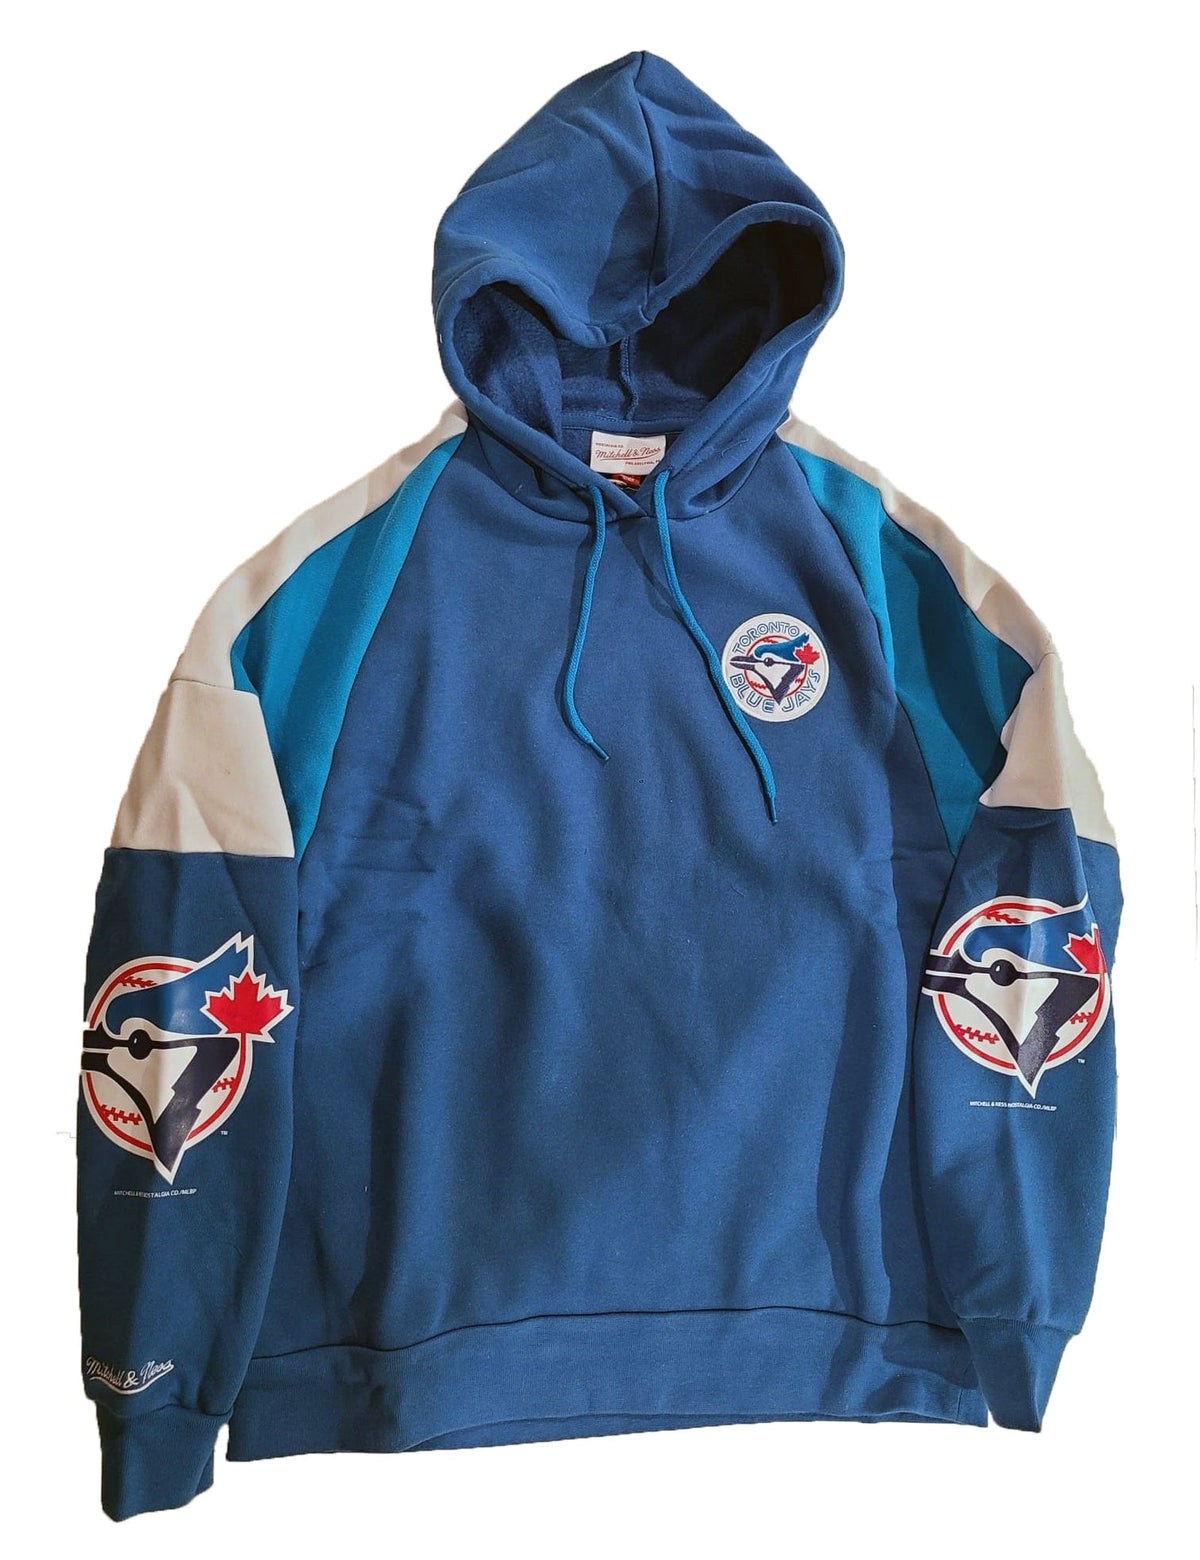 mitchell and ness blue jays